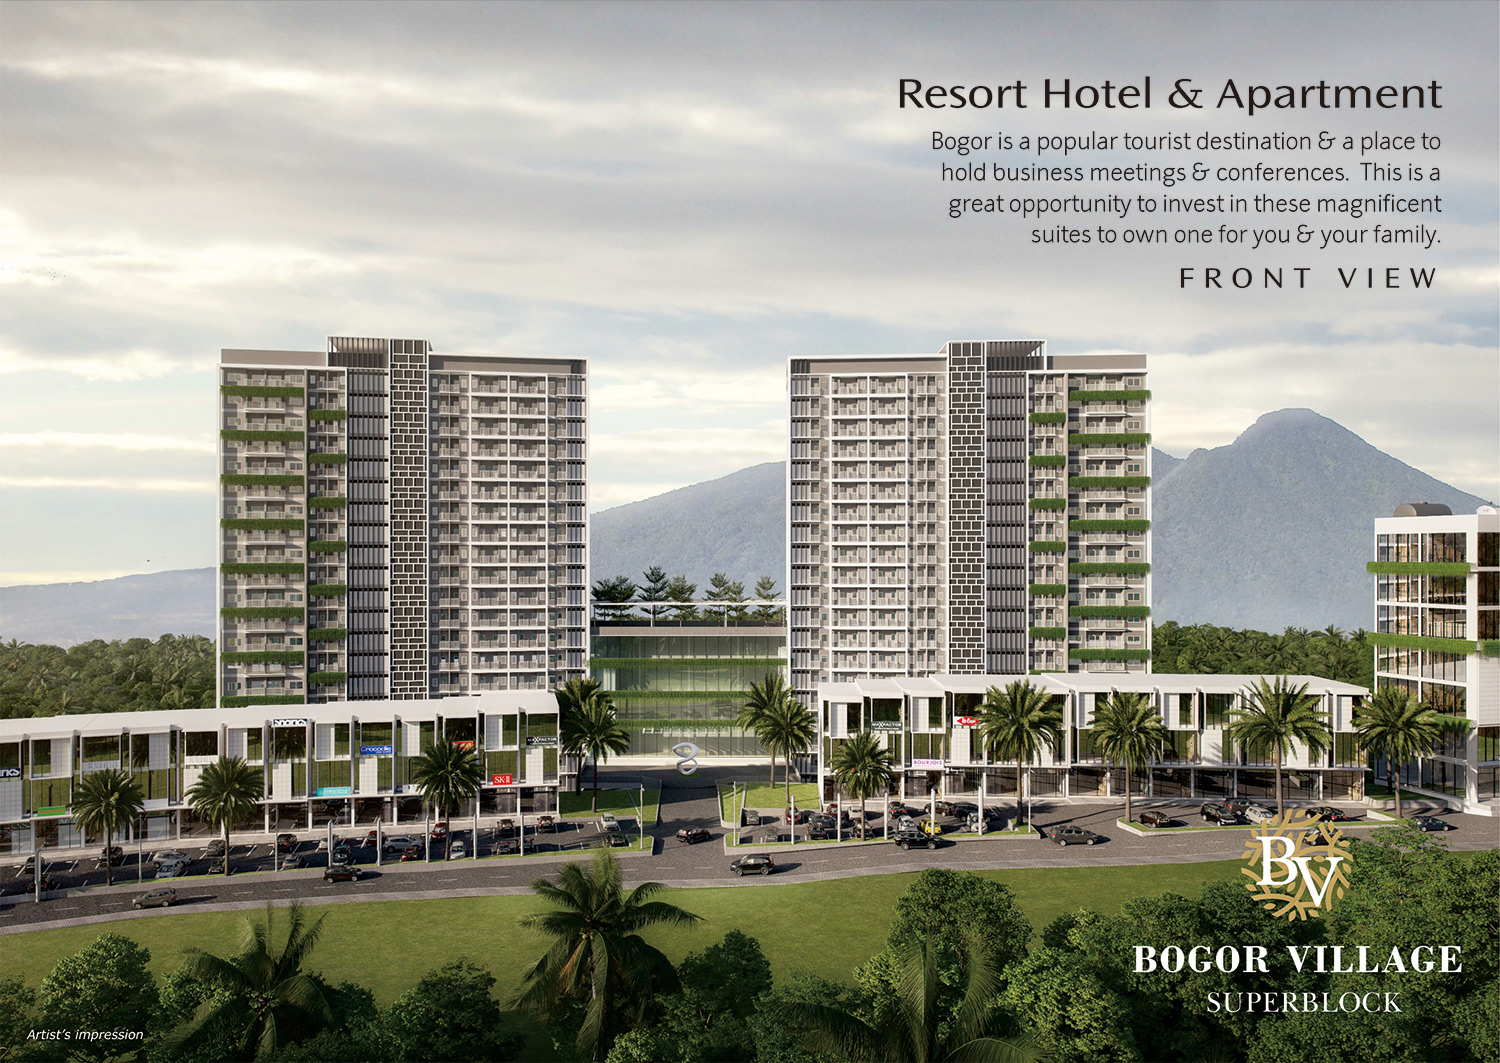 Resort Hotel and Apartment